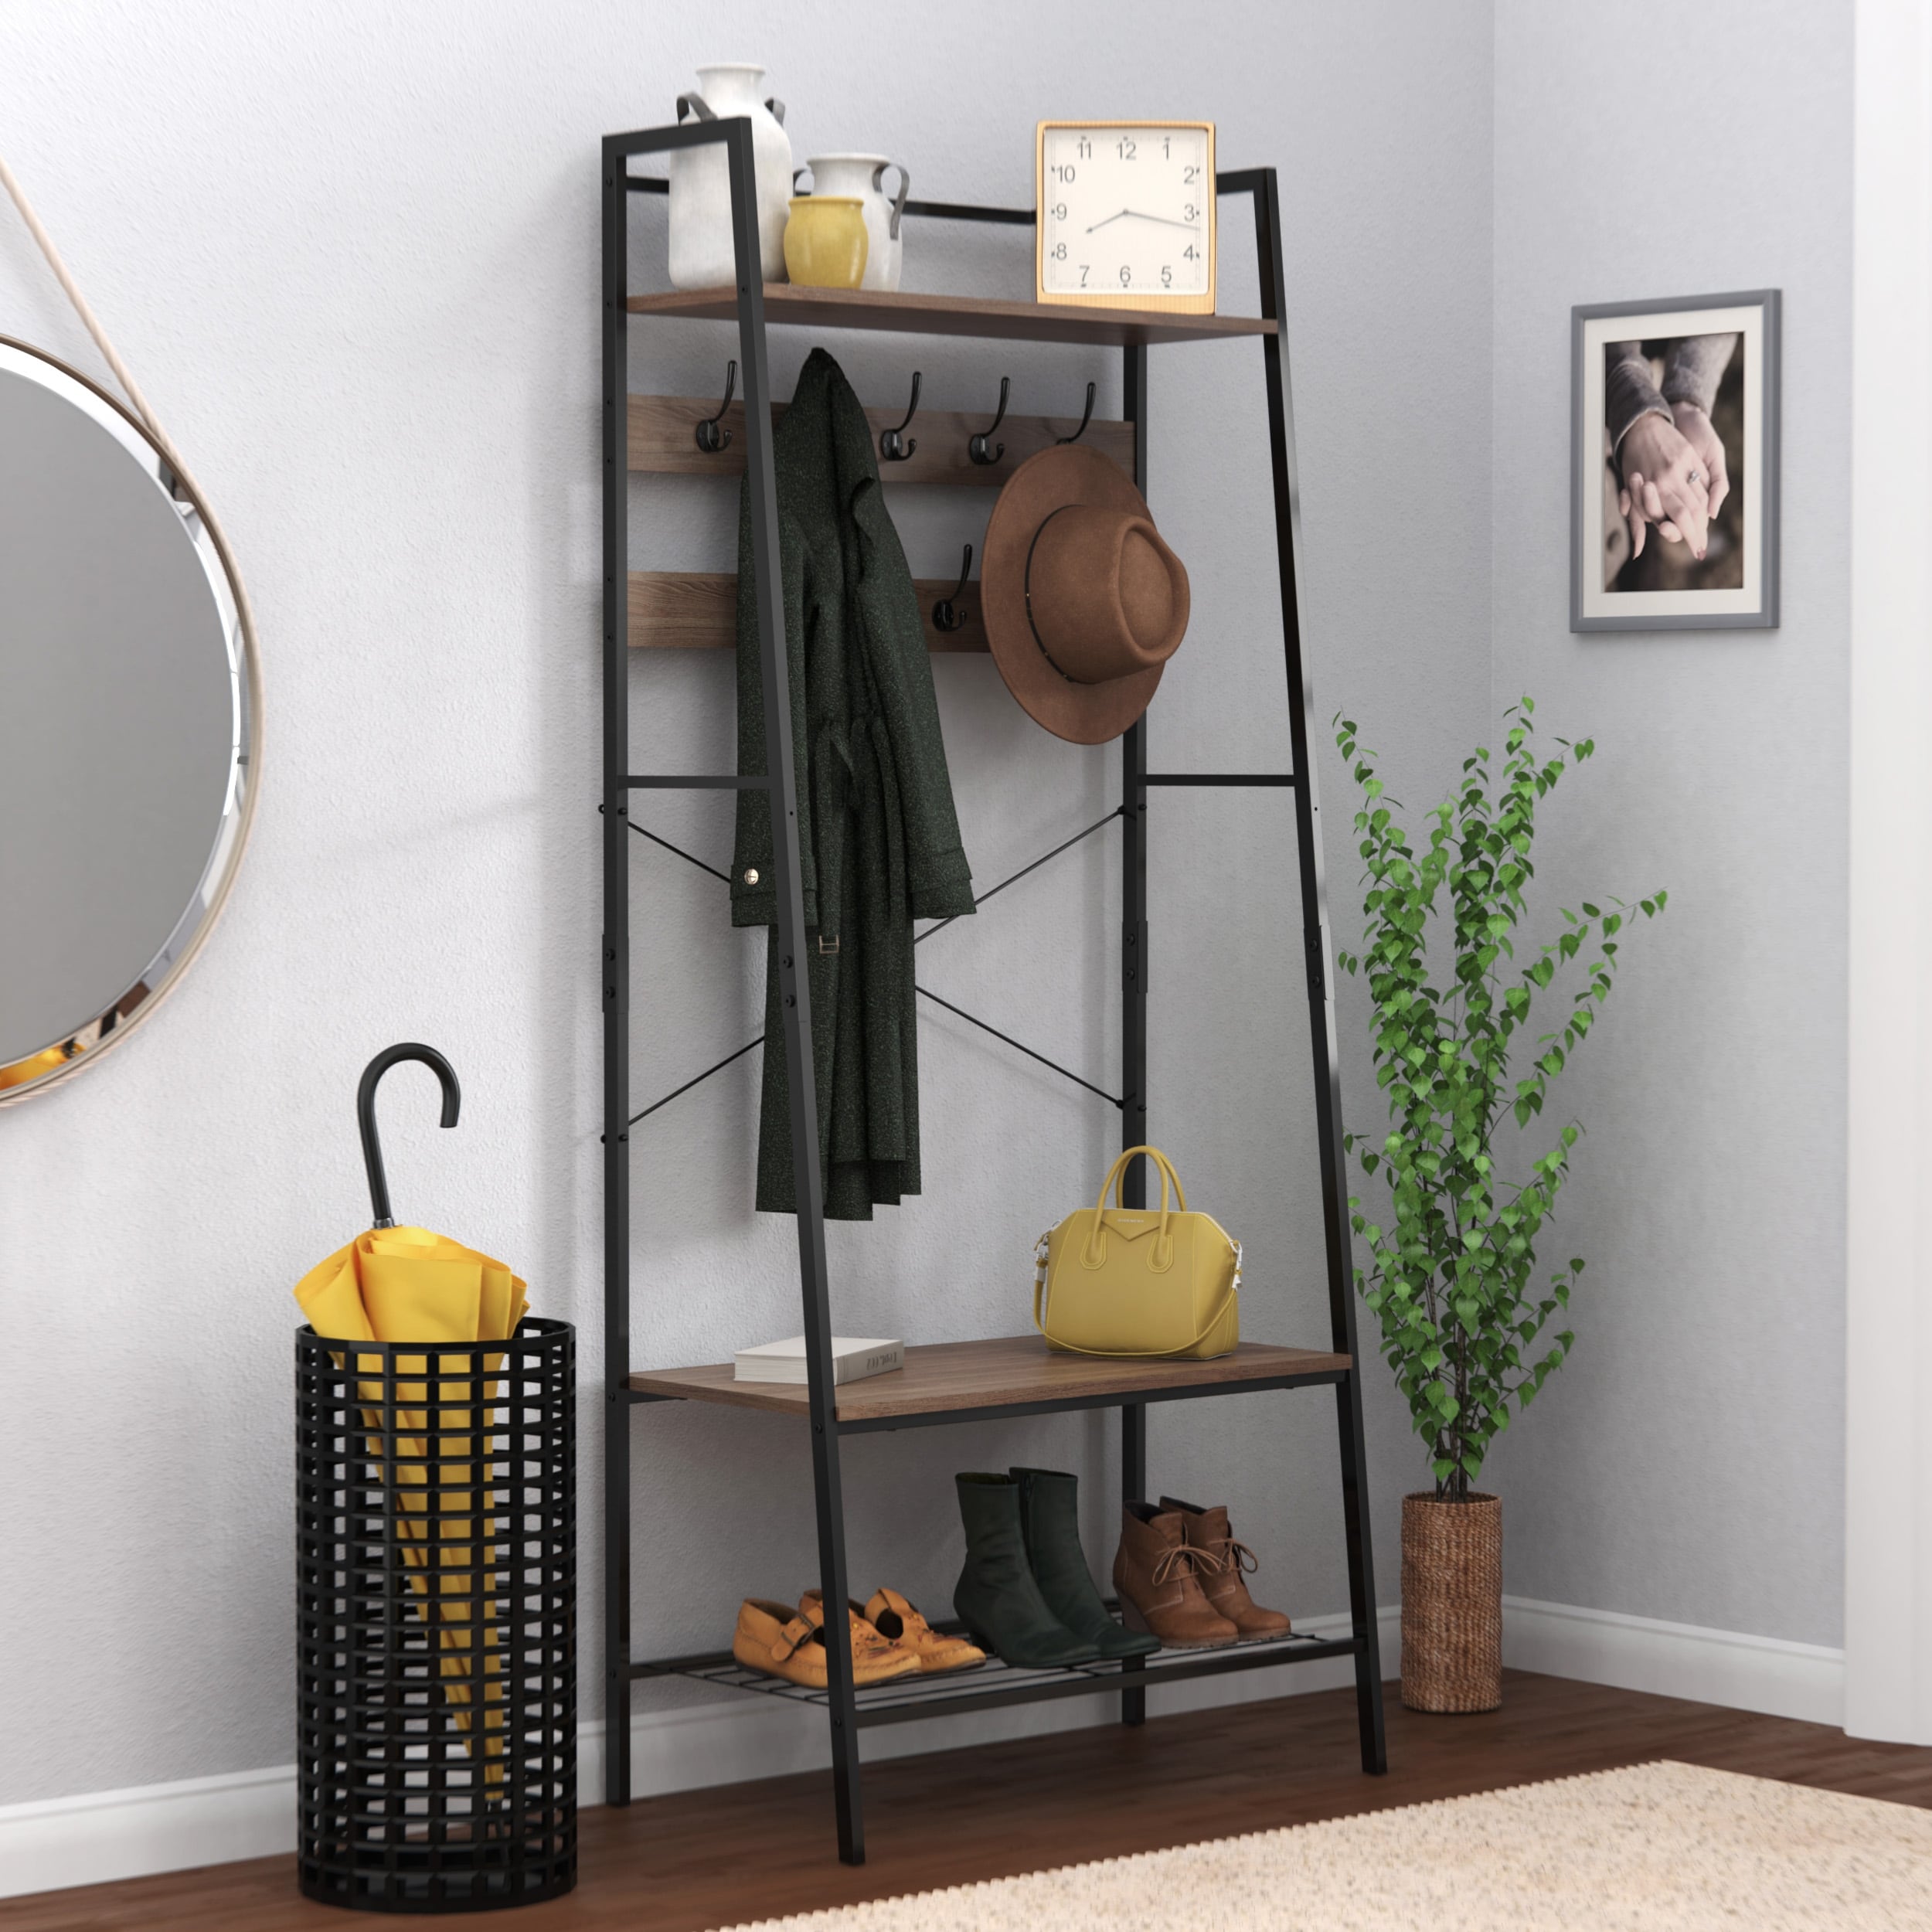 https://ak1.ostkcdn.com/images/products/is/images/direct/1160809c7c10ea9d3f9a4c119f7c06d50bc36cb1/ClosetMaid-Steel-Frame-Entryway-Bench-with-9-Hooks-%26-Shoe-Storage-Rack.jpg